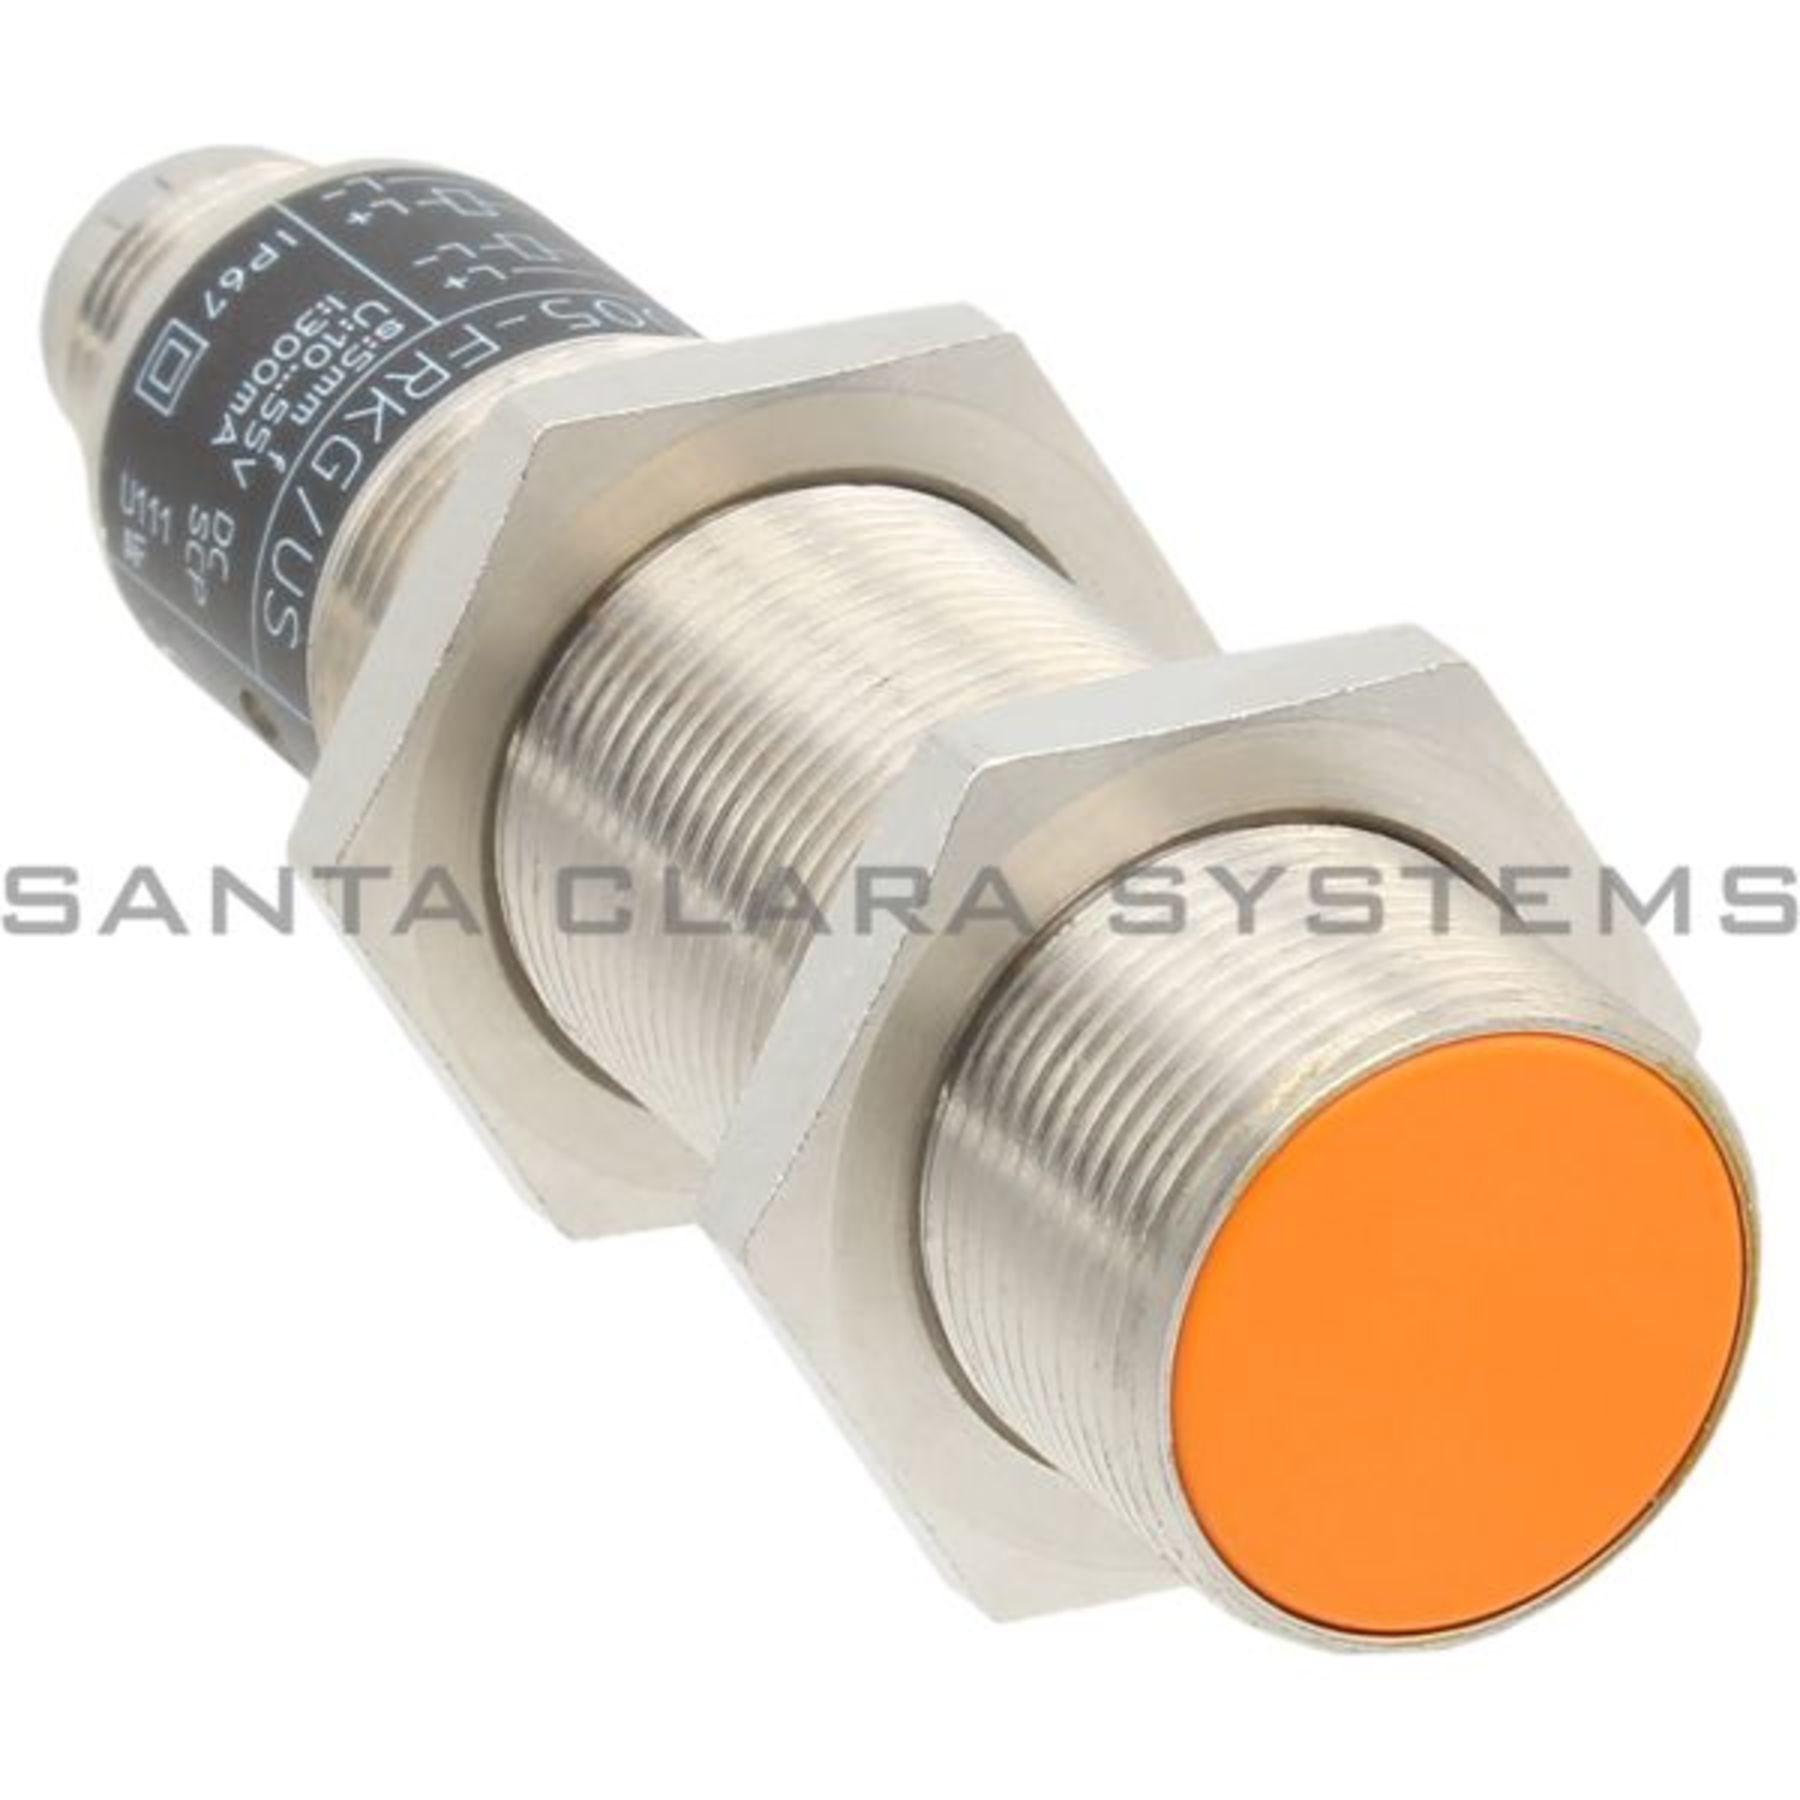 IG5773 Efector In stock and ready to ship - Santa Clara Systems